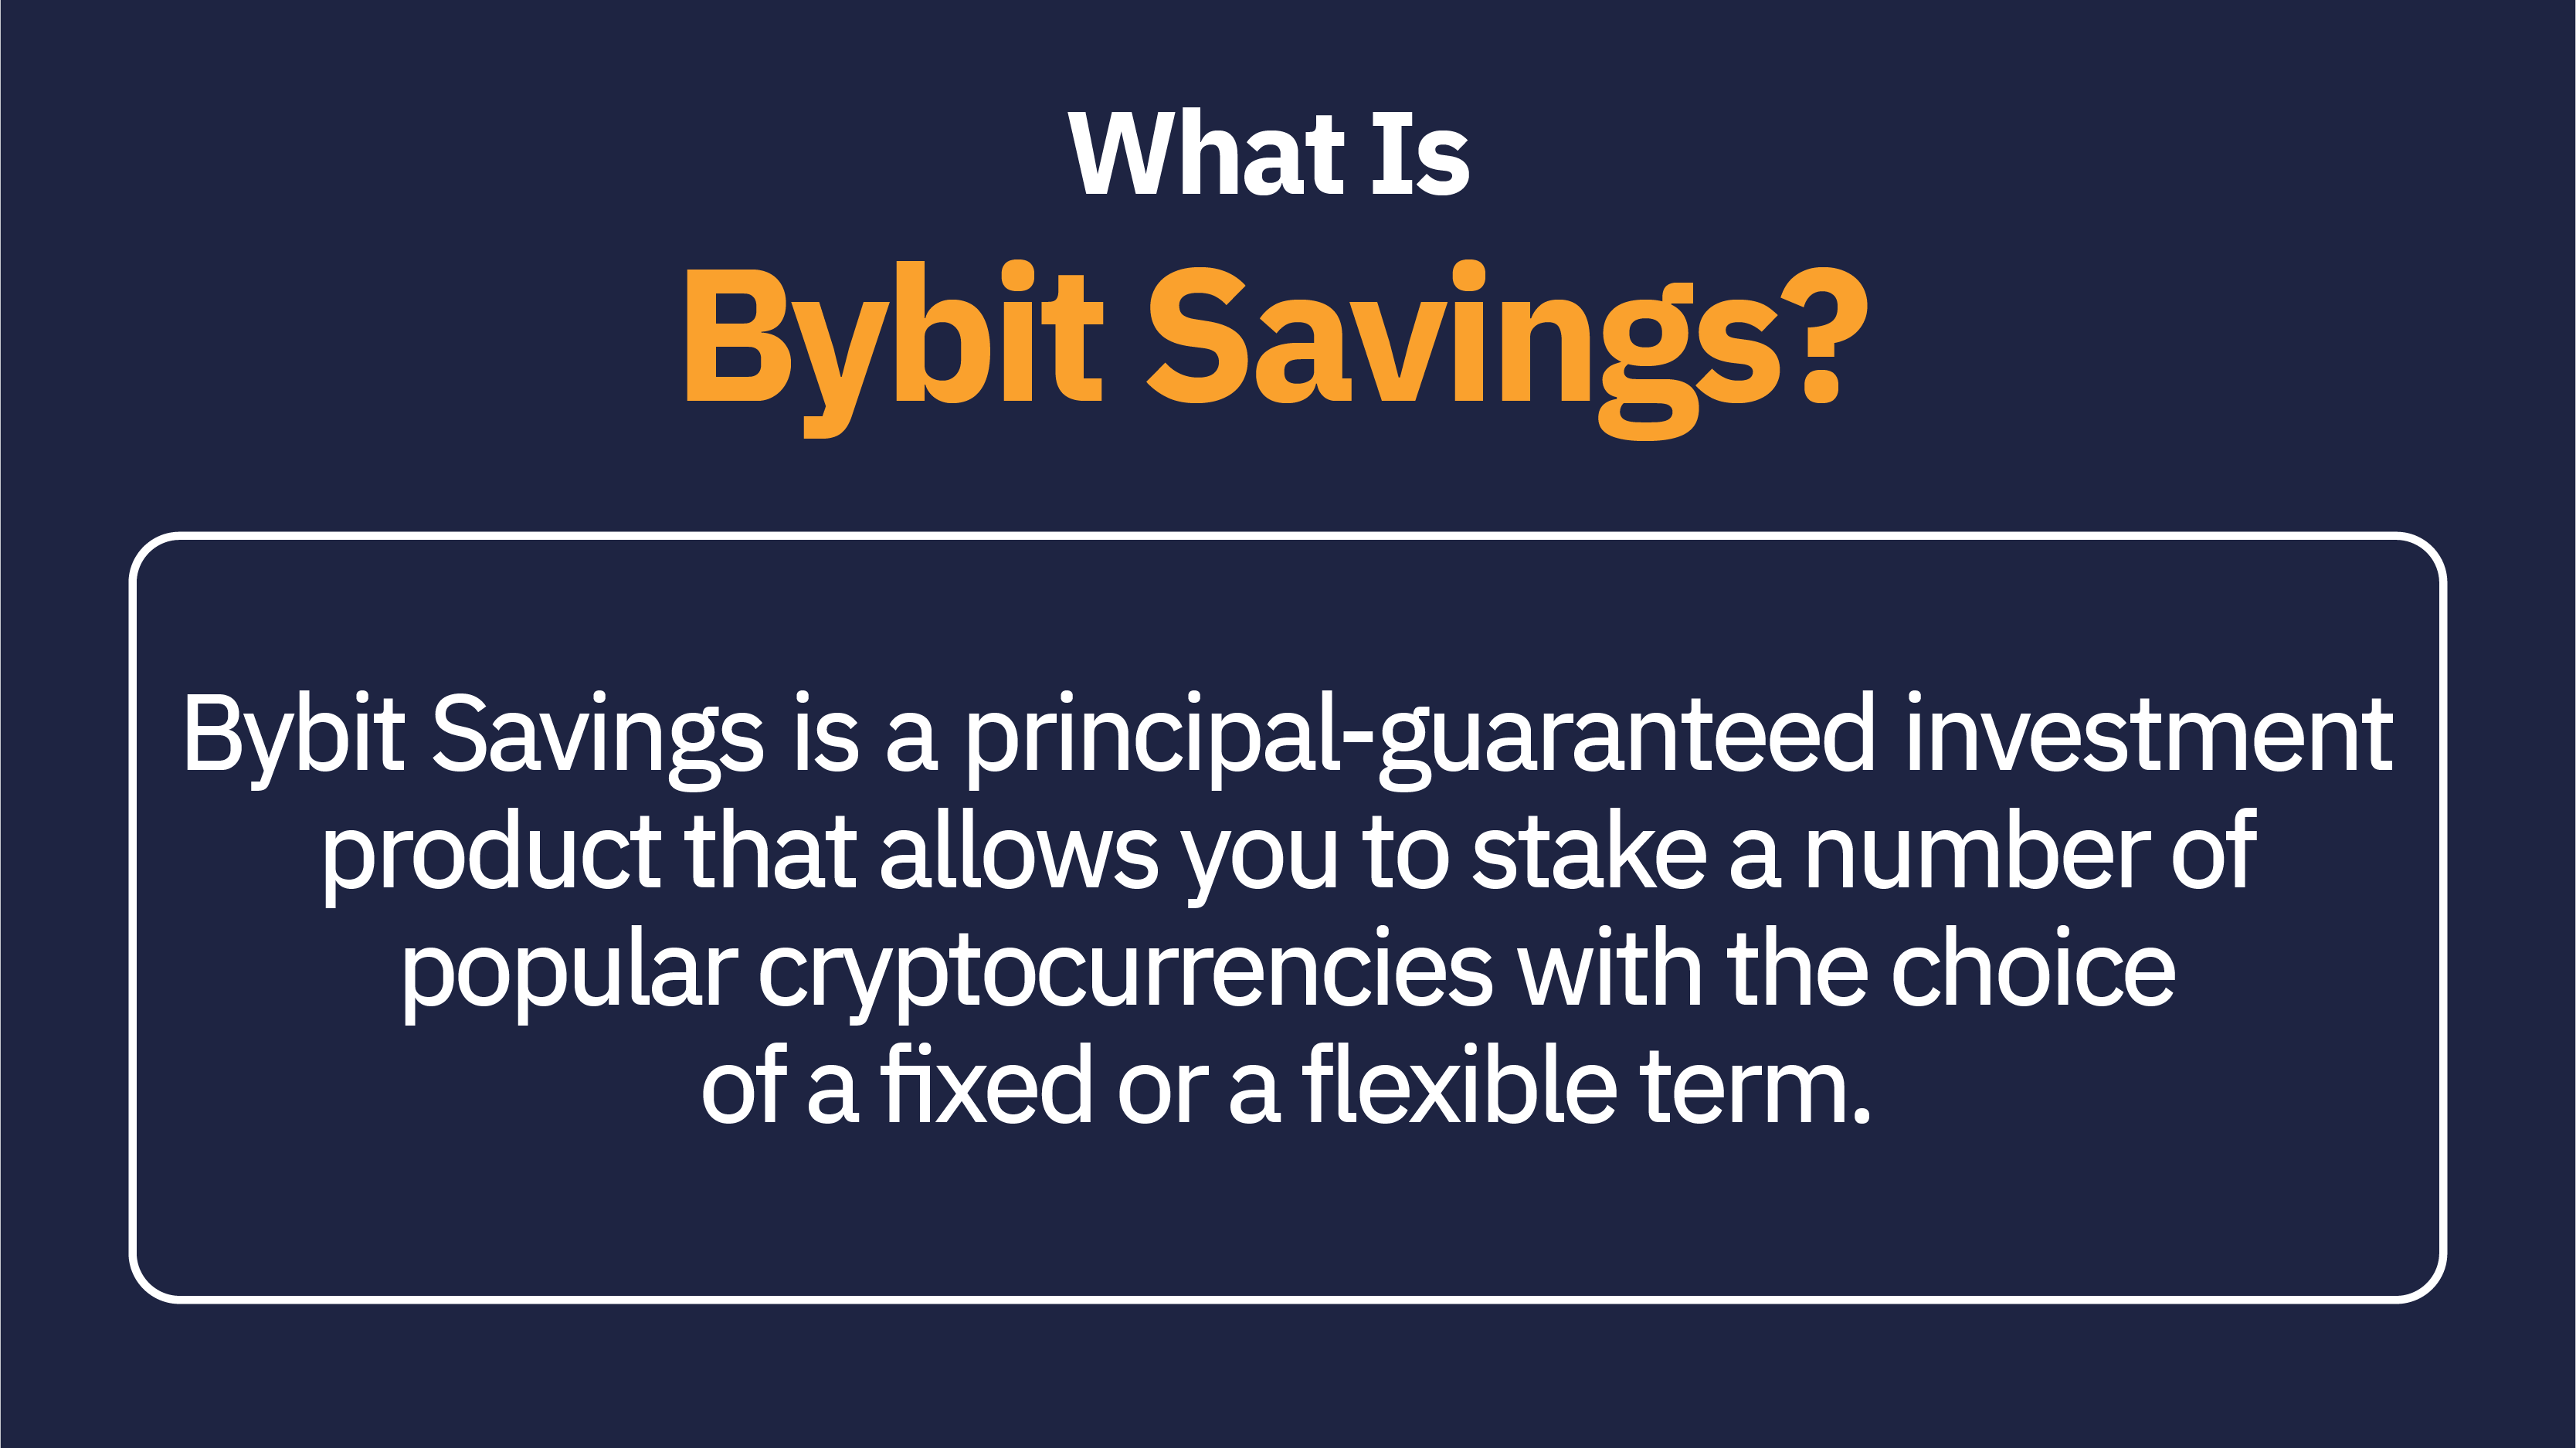 Bybit Savings is a principal-guaranteed investment product that allows you to stake a number of popular cryptocurrencies with the choice of a fixed or a flexible term.